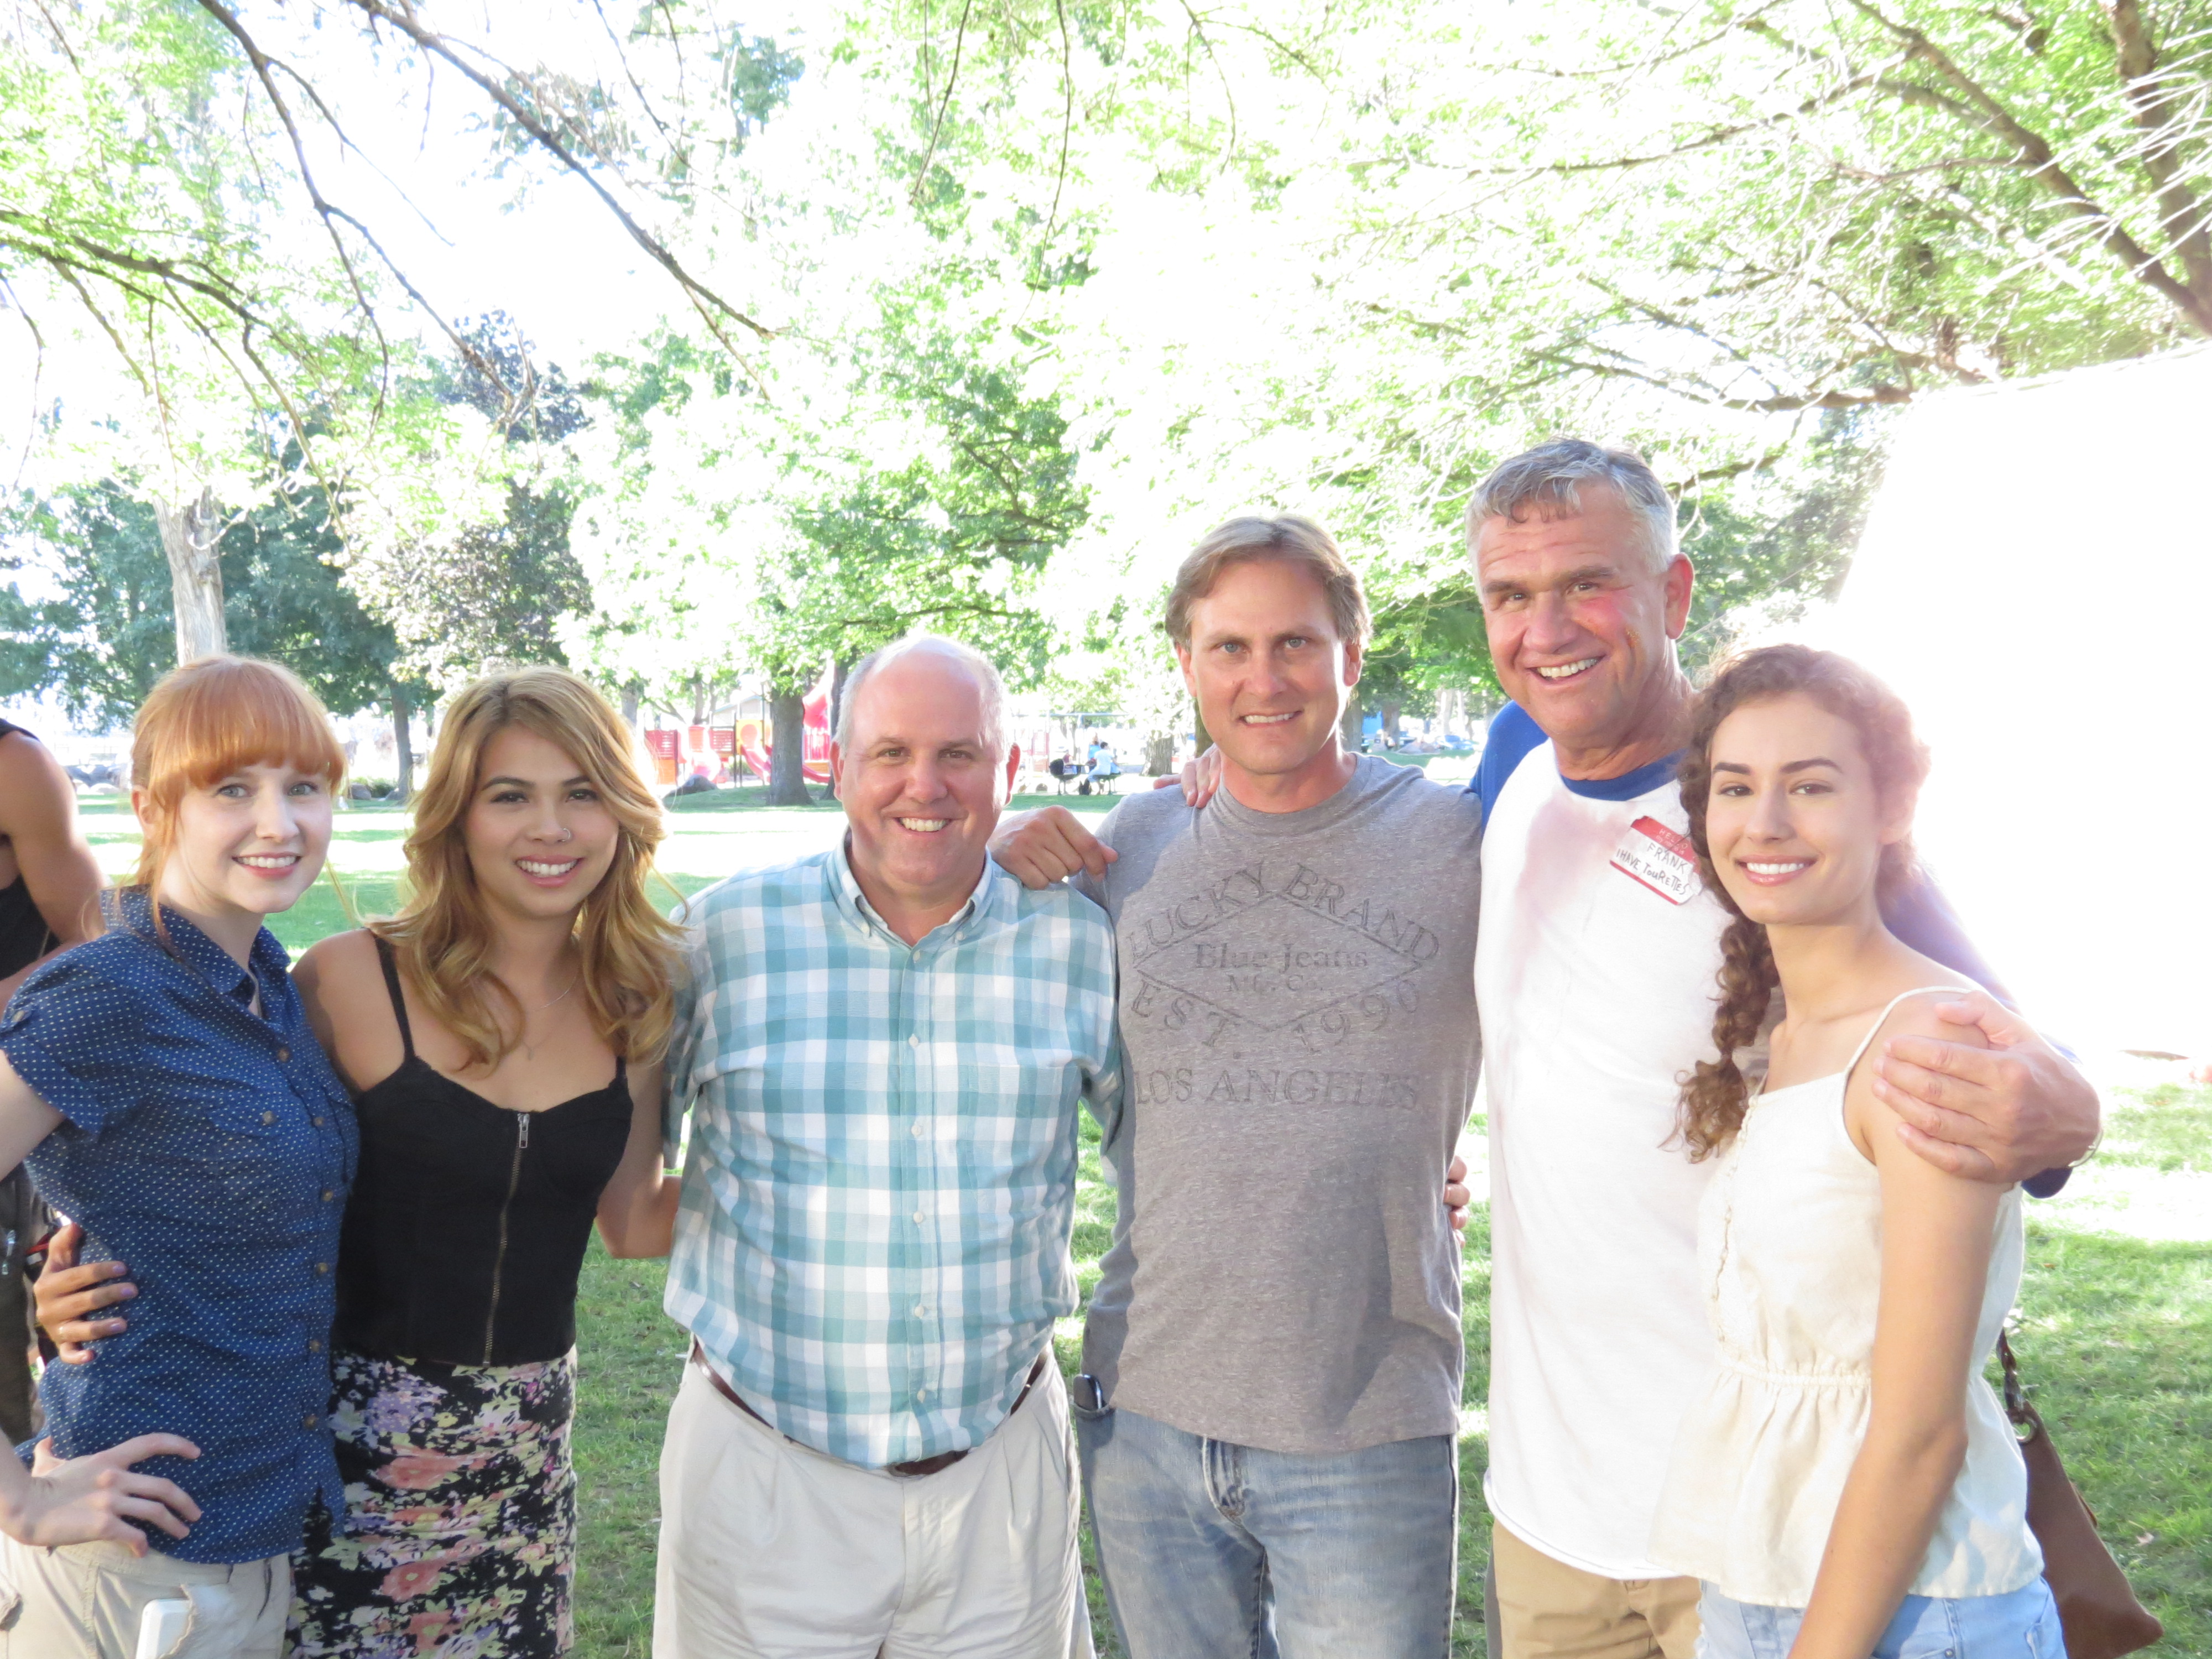 Director Dale Peterson with Actors Hayley Kiyoto, Mary Kate Wiles, Rachel Dipillo, James Dumont, and Garrett M. Brown on the set of 